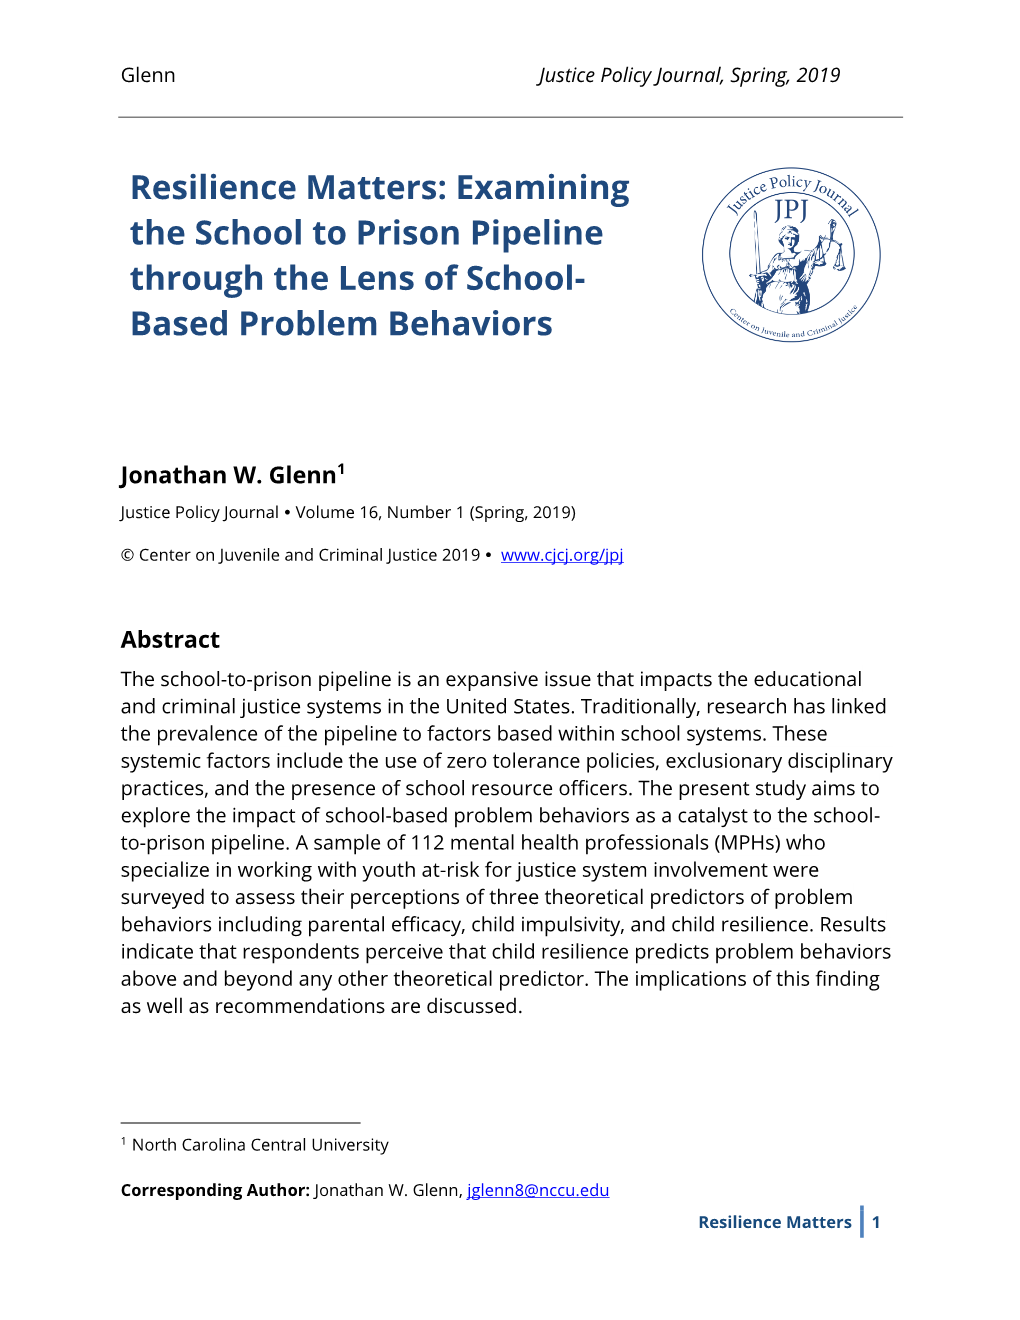 Resilience Matters: Examining the School to Prison Pipeline Through the Lens of School